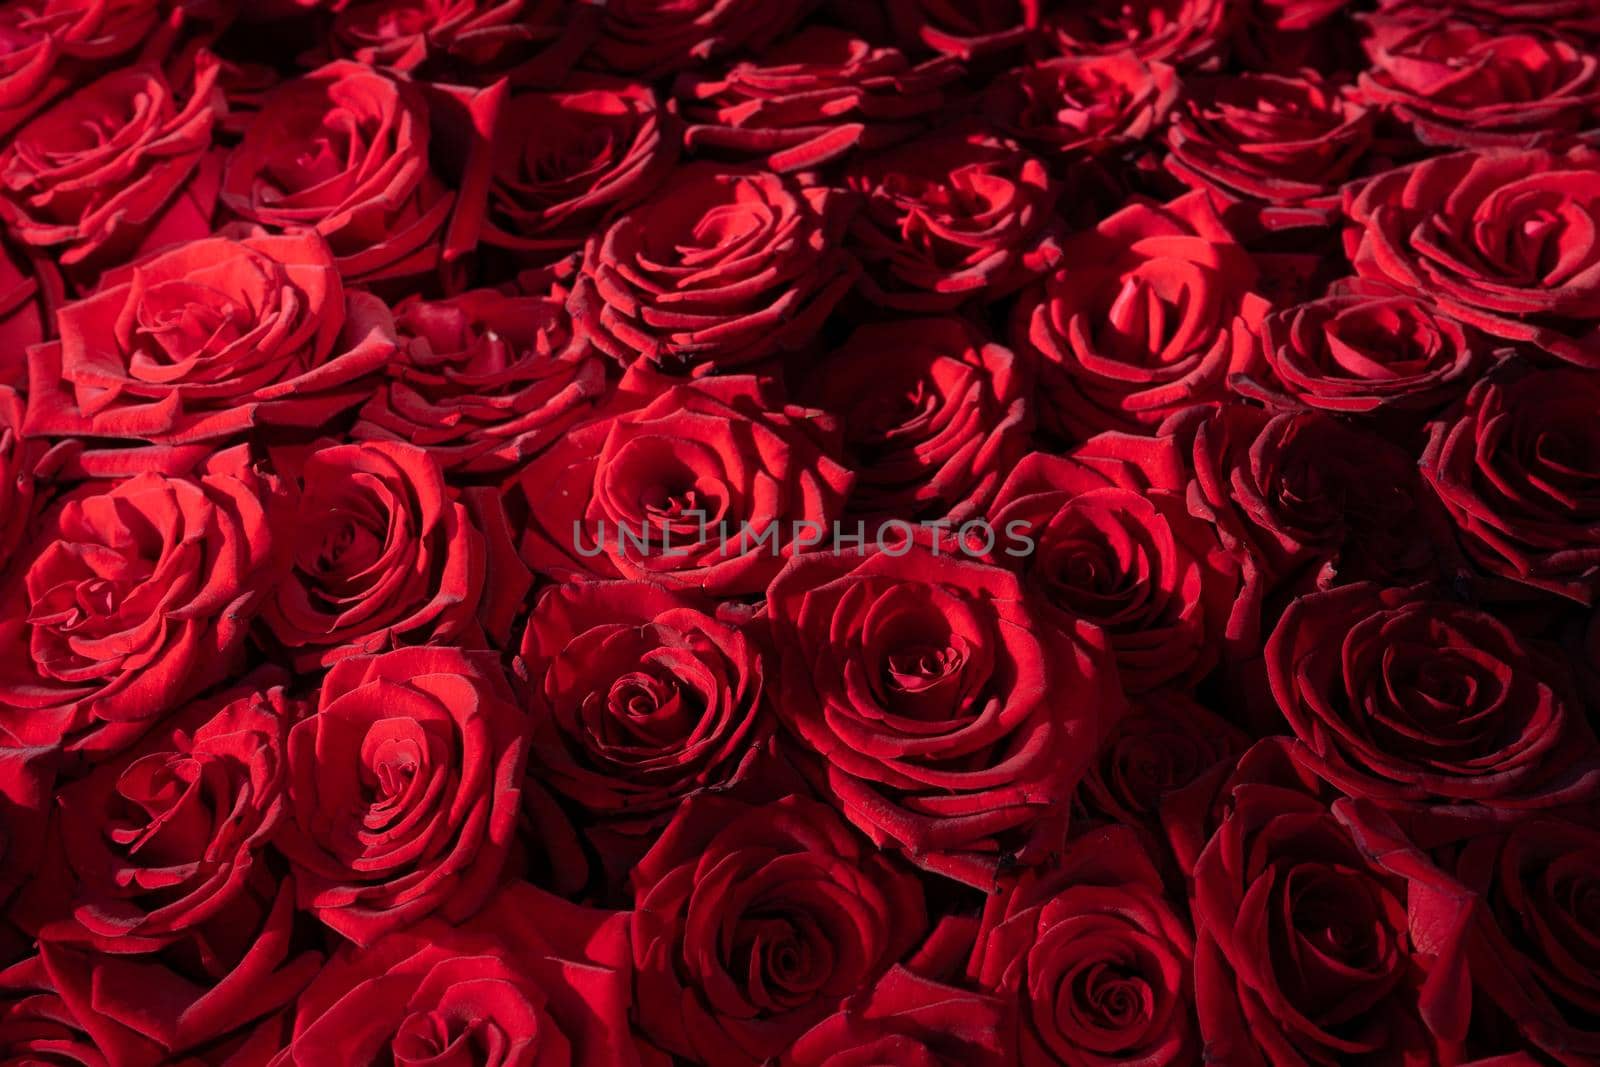 Many blooming red roses with romantic lighting.